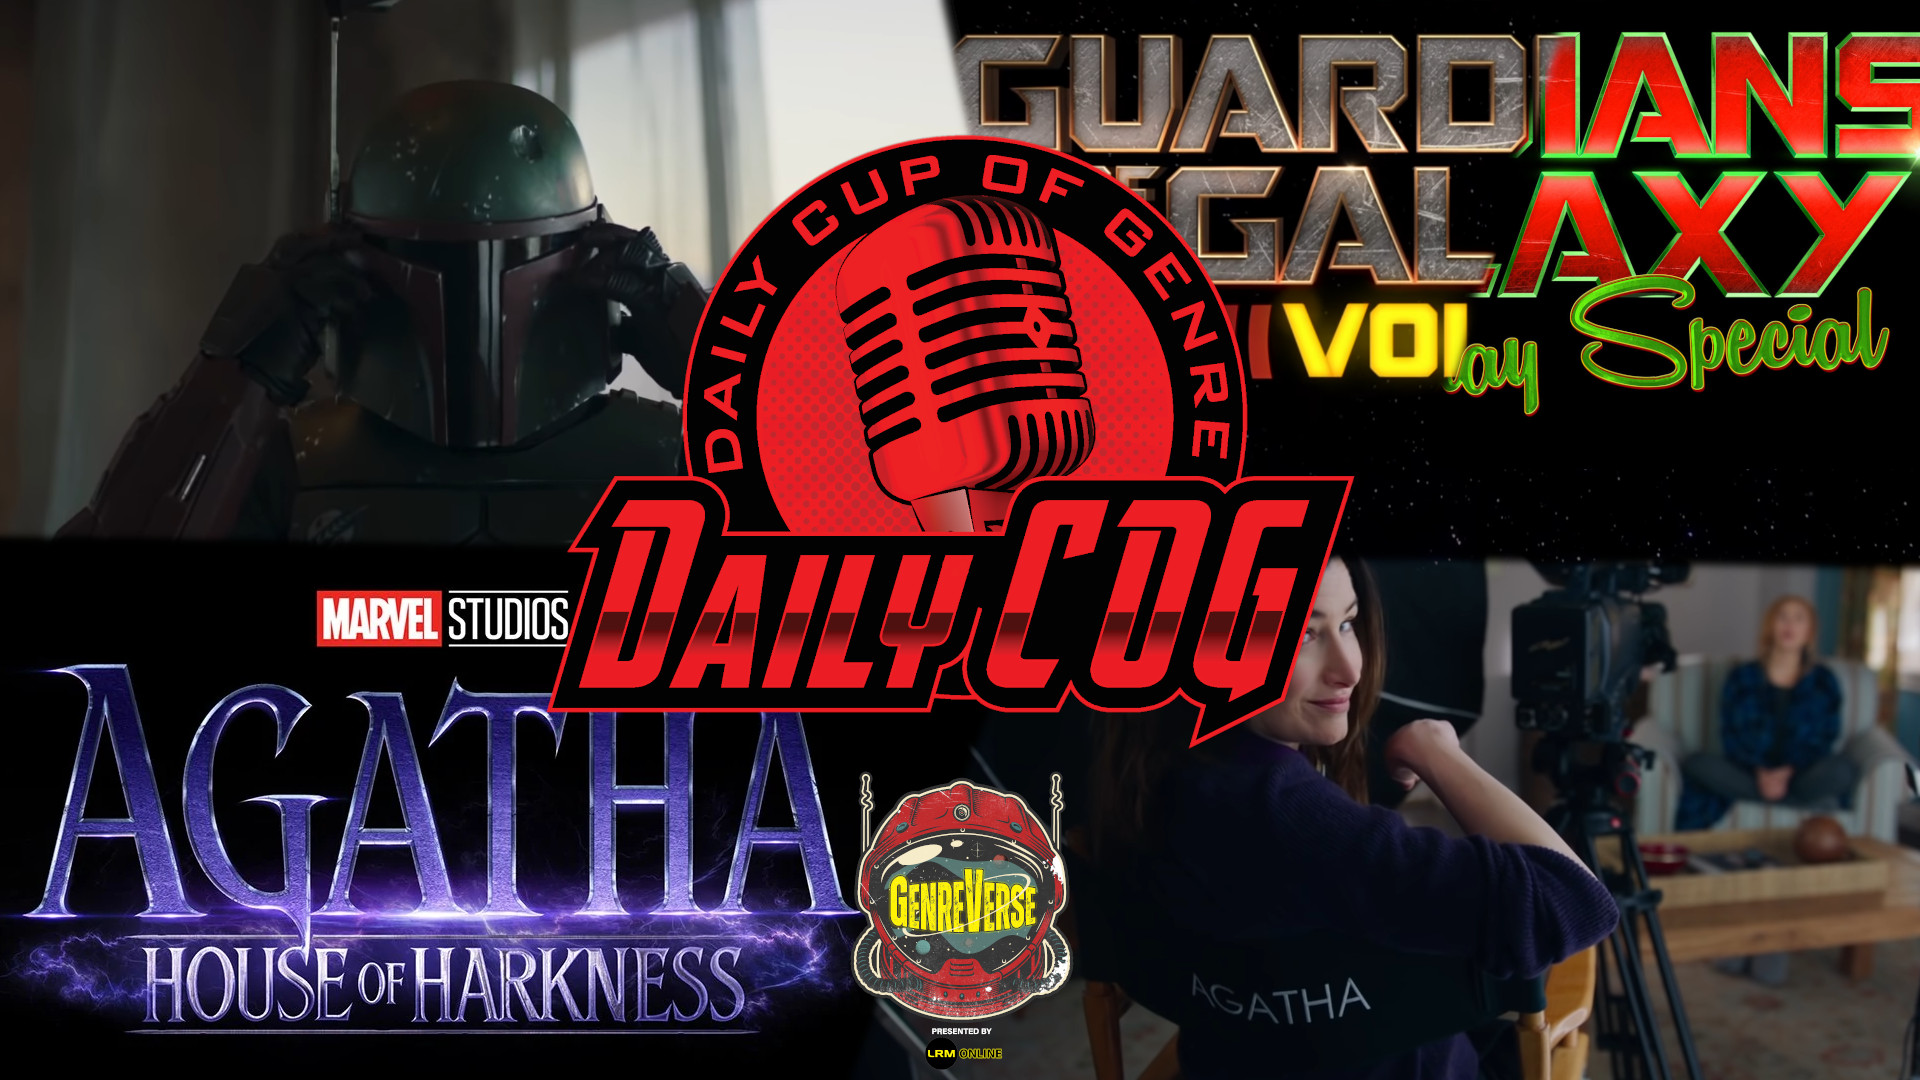 Book of Boba Fett Chapter 3 Reaction, Guardians Of The Galaxy Vol 3 And Holiday Special Comments From James Gunn, House Of Harkness Details, Zorro On CW Daily COG